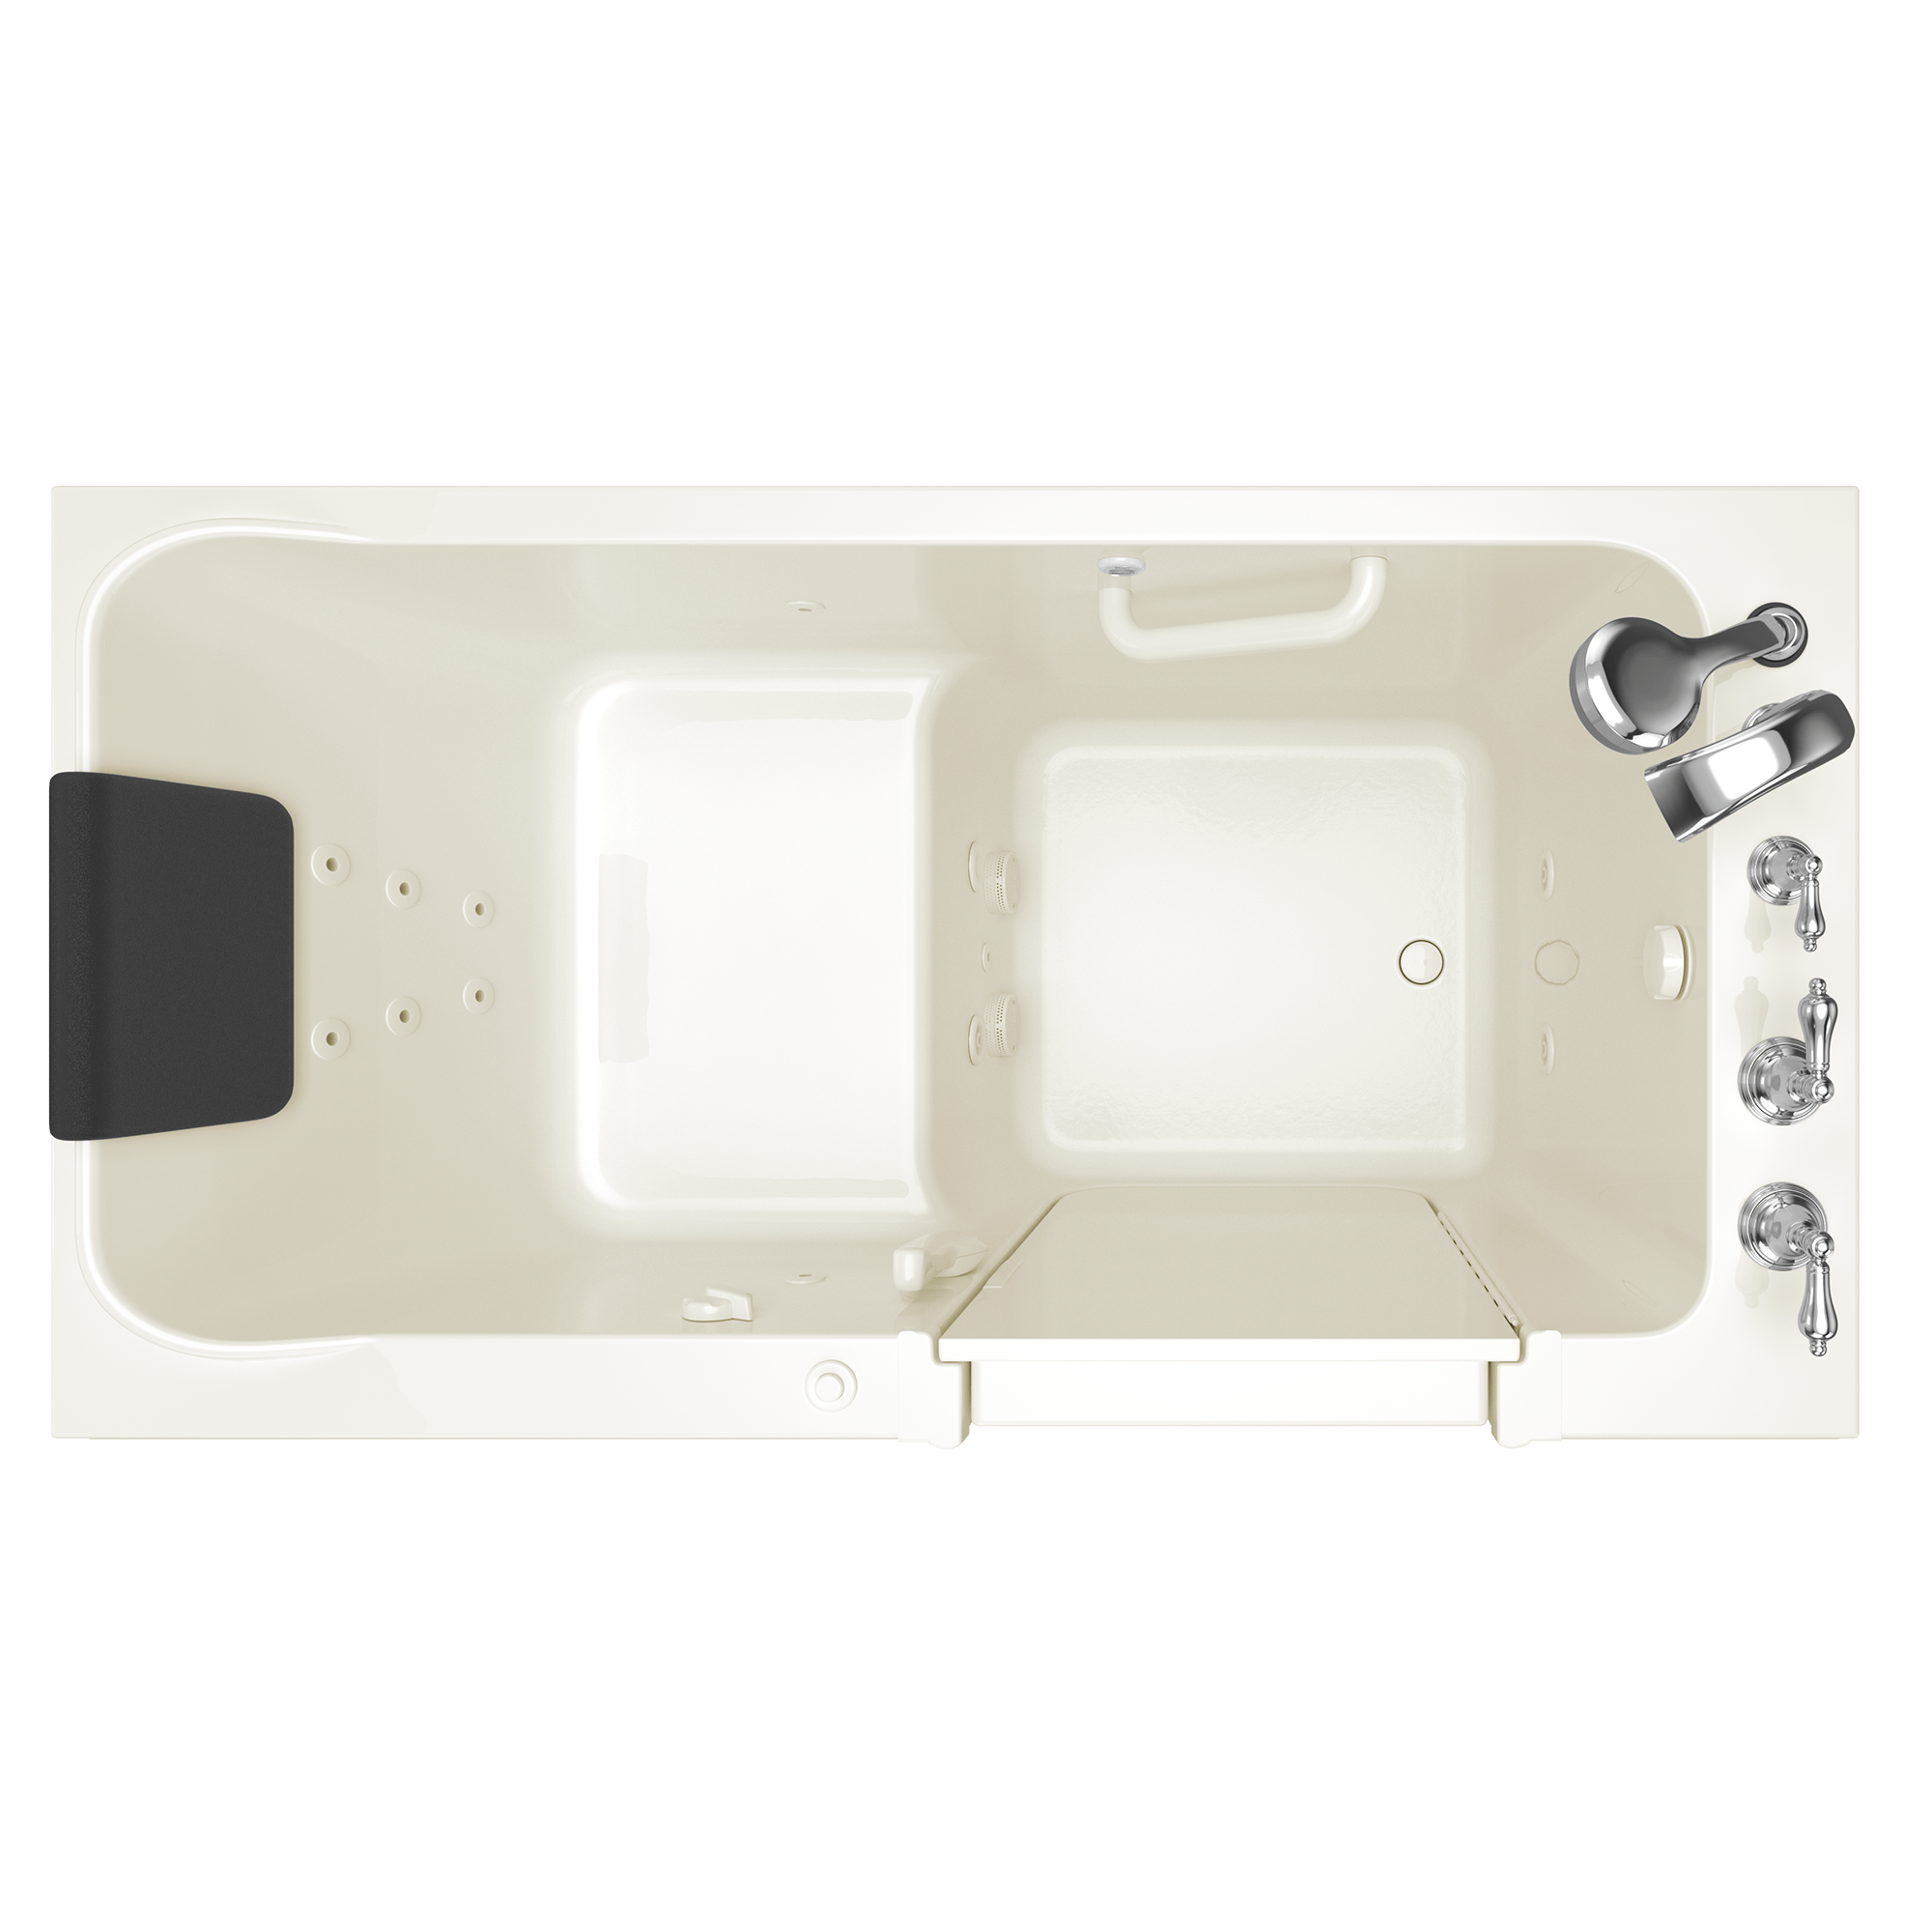 Acrylic Luxury Series 32 x 60  Inch Walk in Tub With Whirlpool System   Right Hand Drain With Faucet WIB LINEN